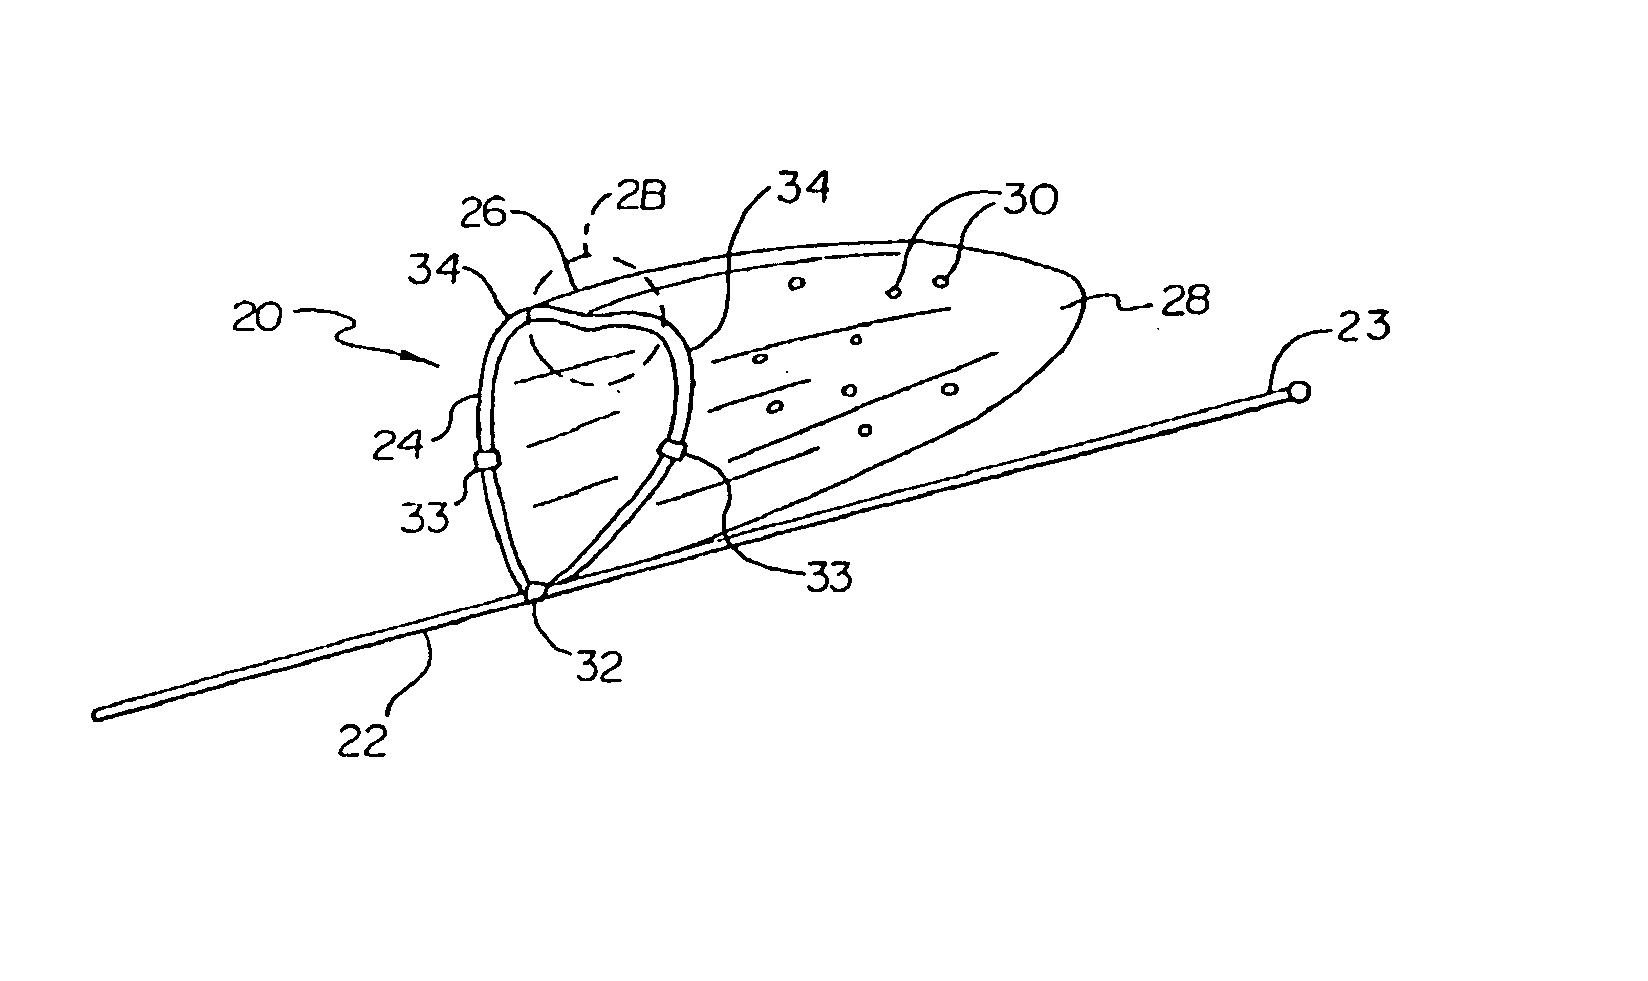 Vascular filter having articulation region and methods of use in the ascending aorta